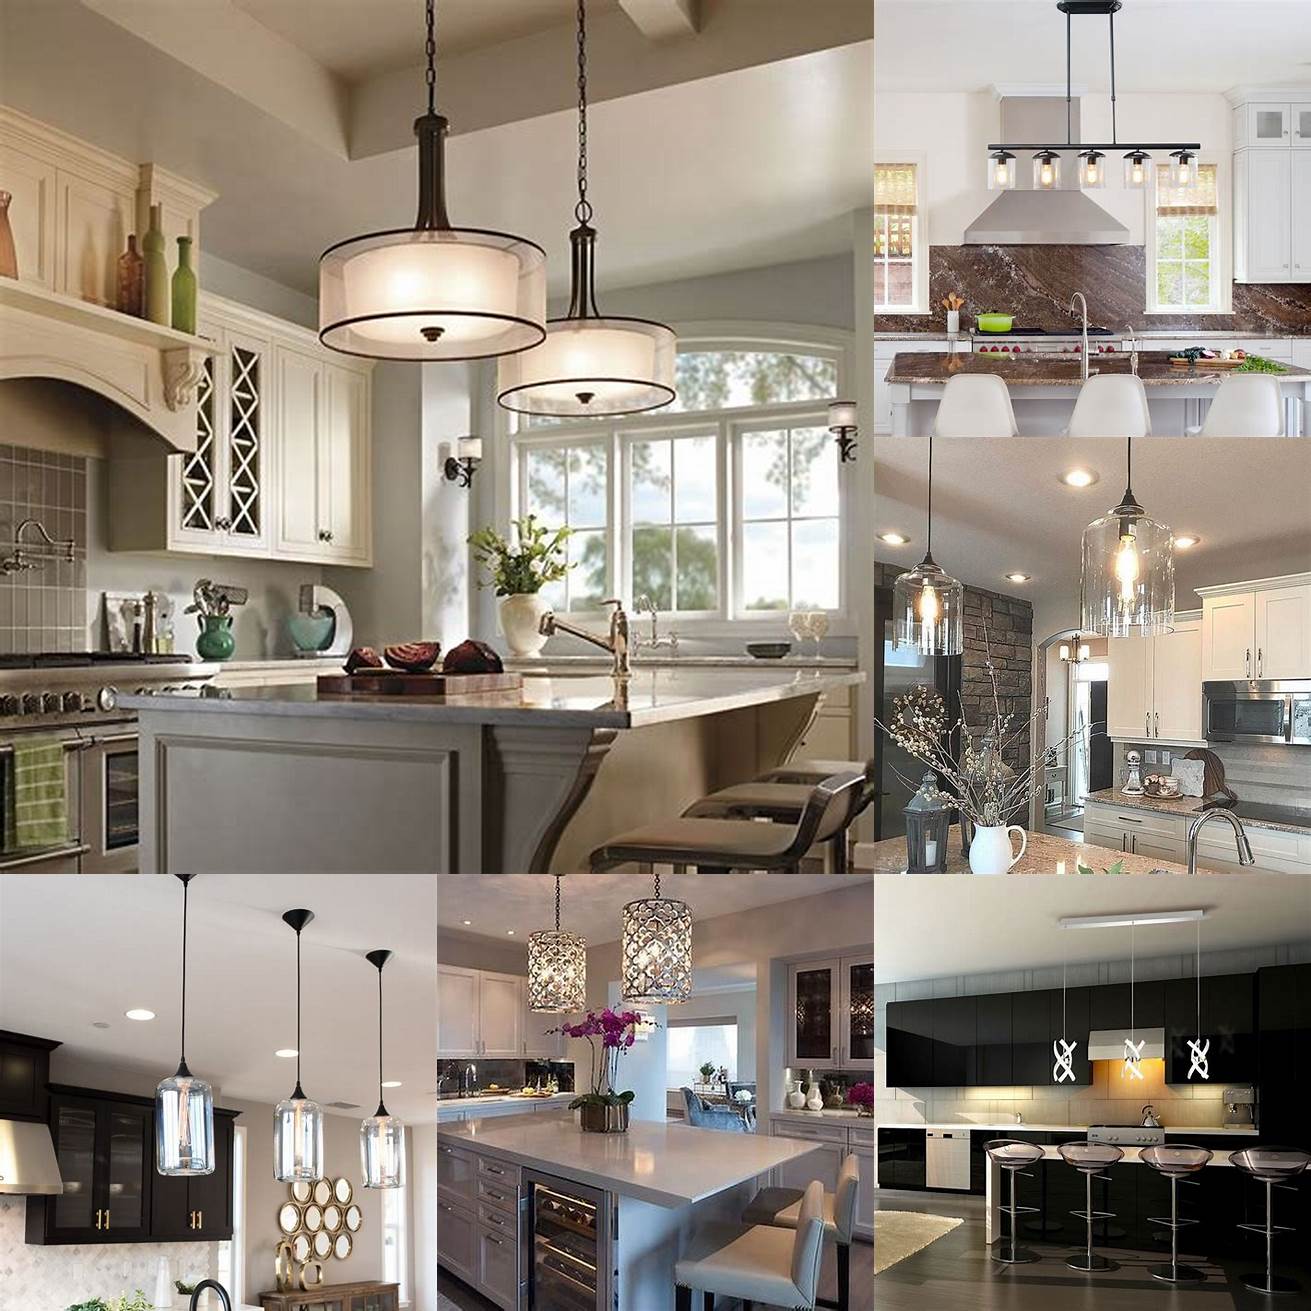 Modern kitchen lighting fixtures can add a sleek and stylish touch to your space